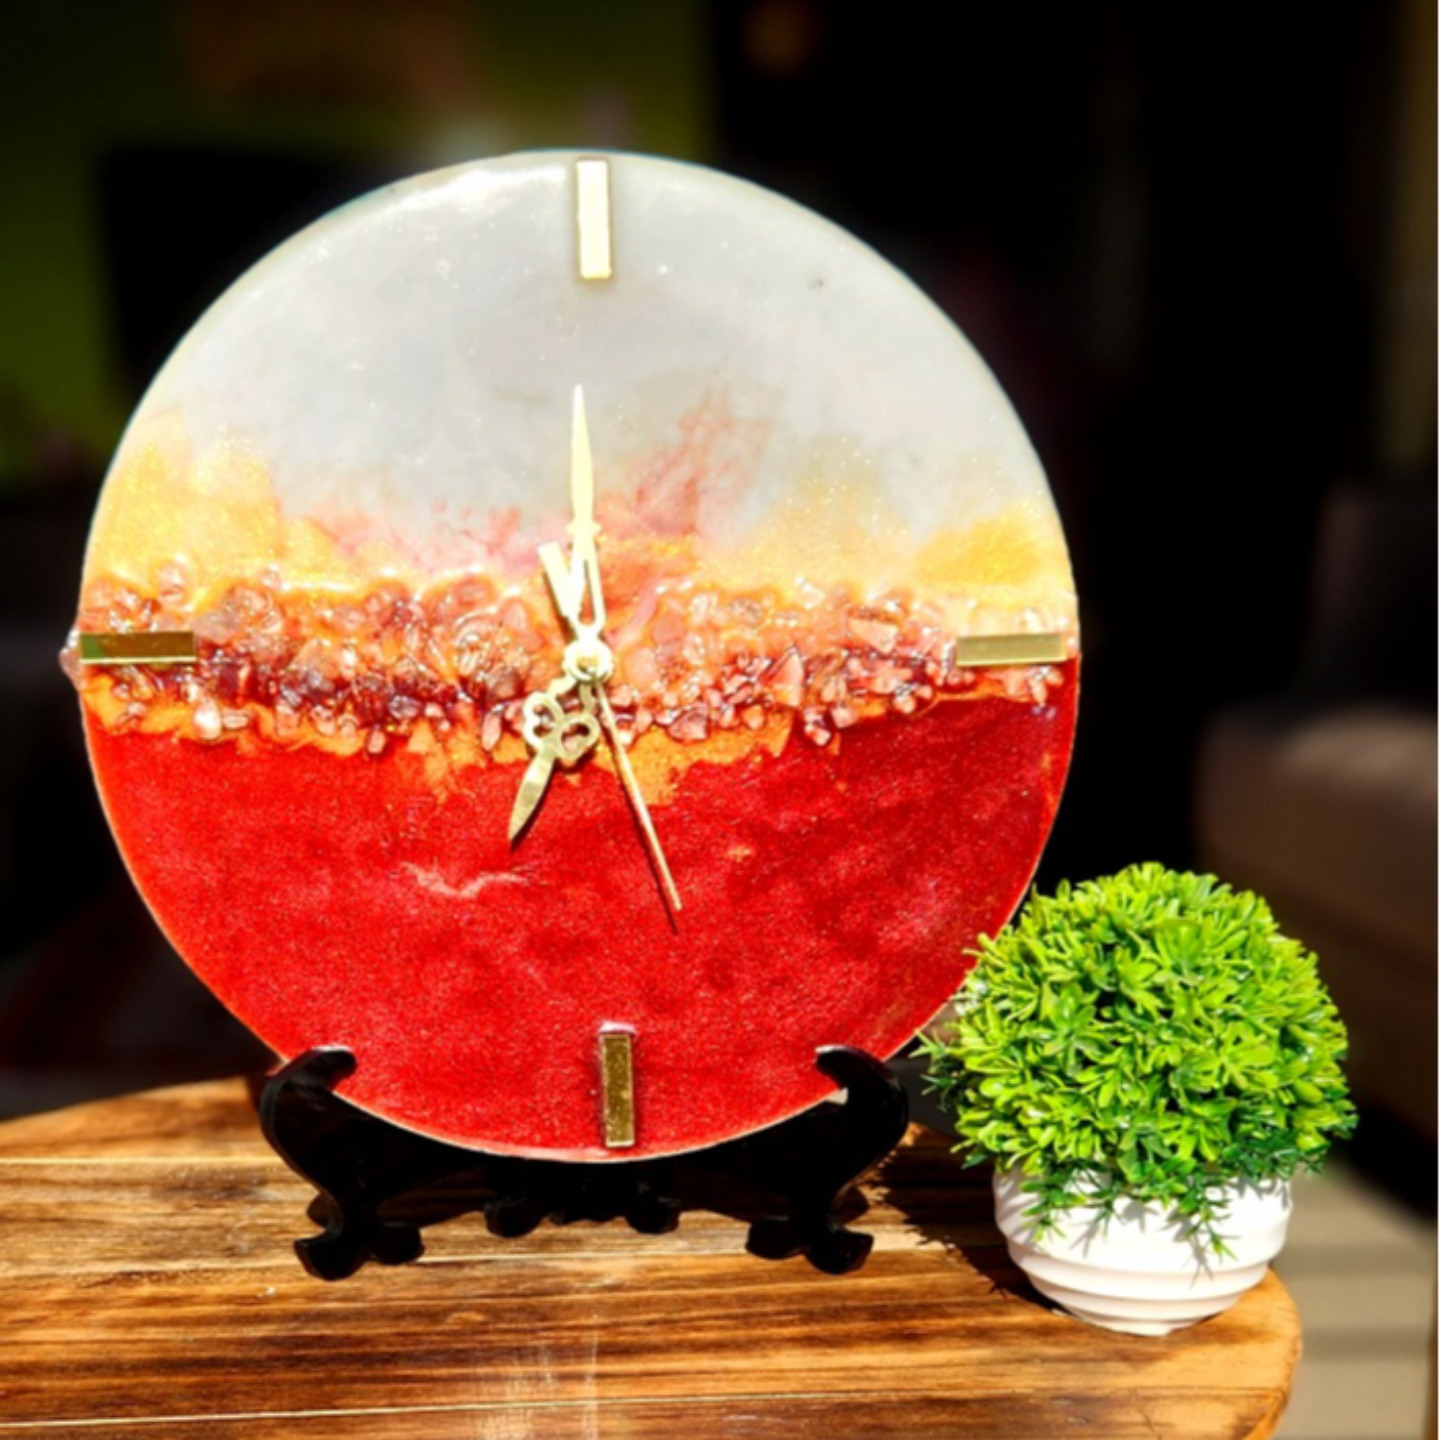 Resin Art Table Clock with stand for Home    Home Decor  Premium Qyality  Available in  68 Red wine, White & Golden